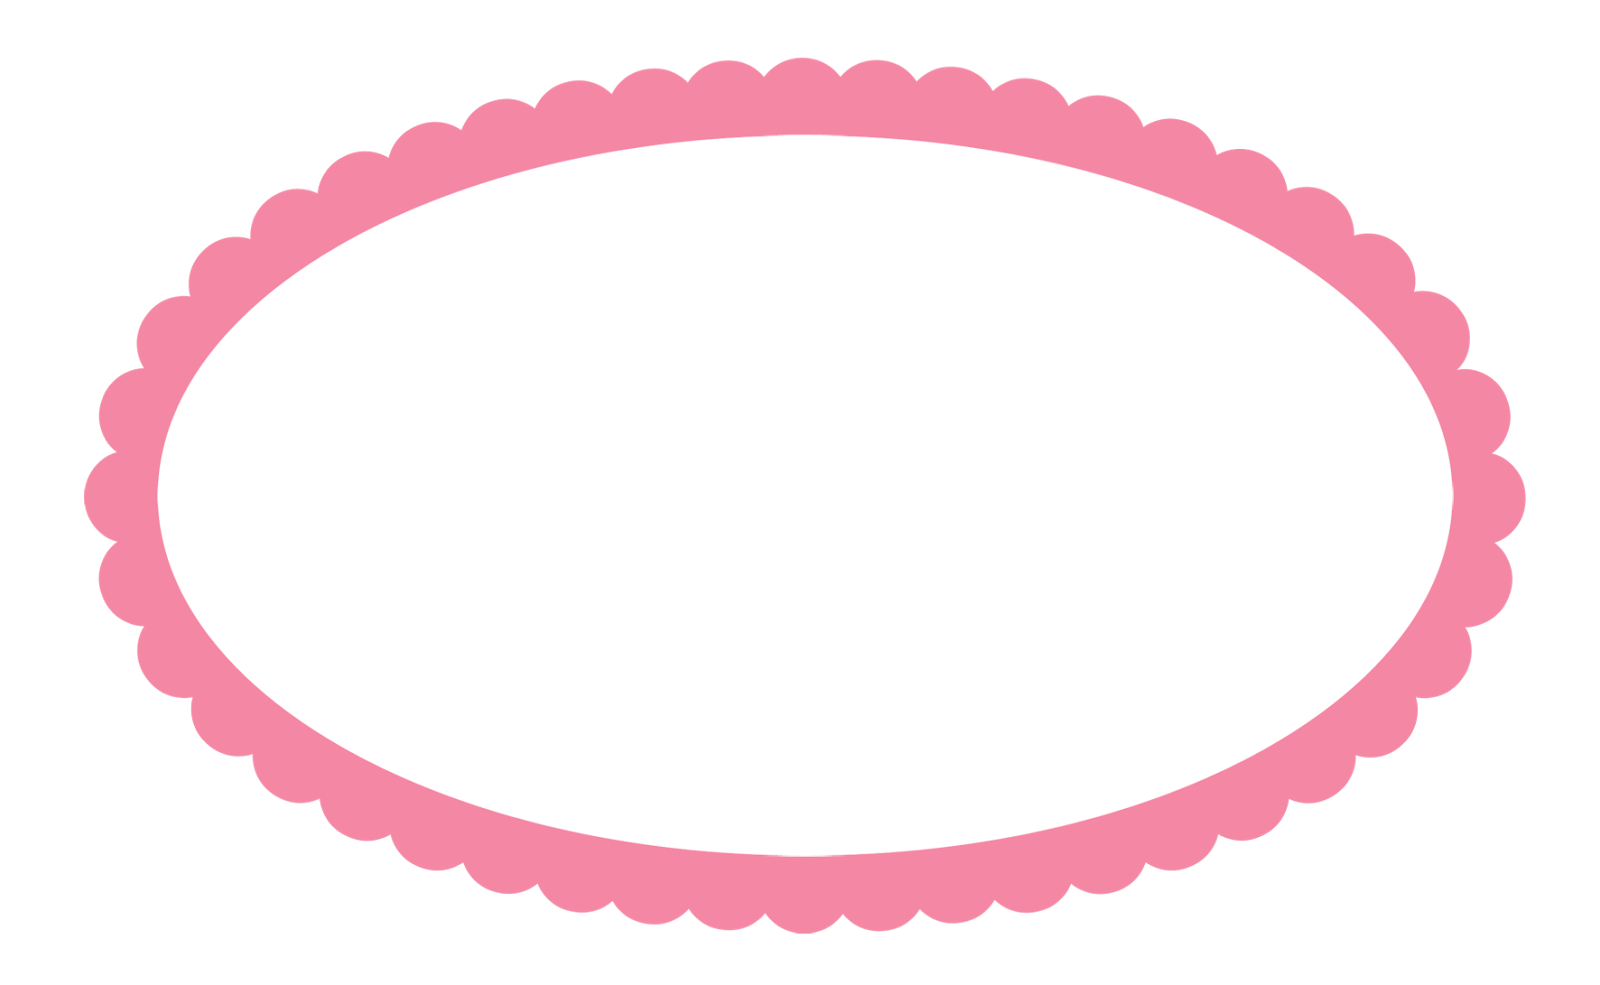 Free Printable Sweet 16 Oval Borders, Frames or Labels. | Oh My ...